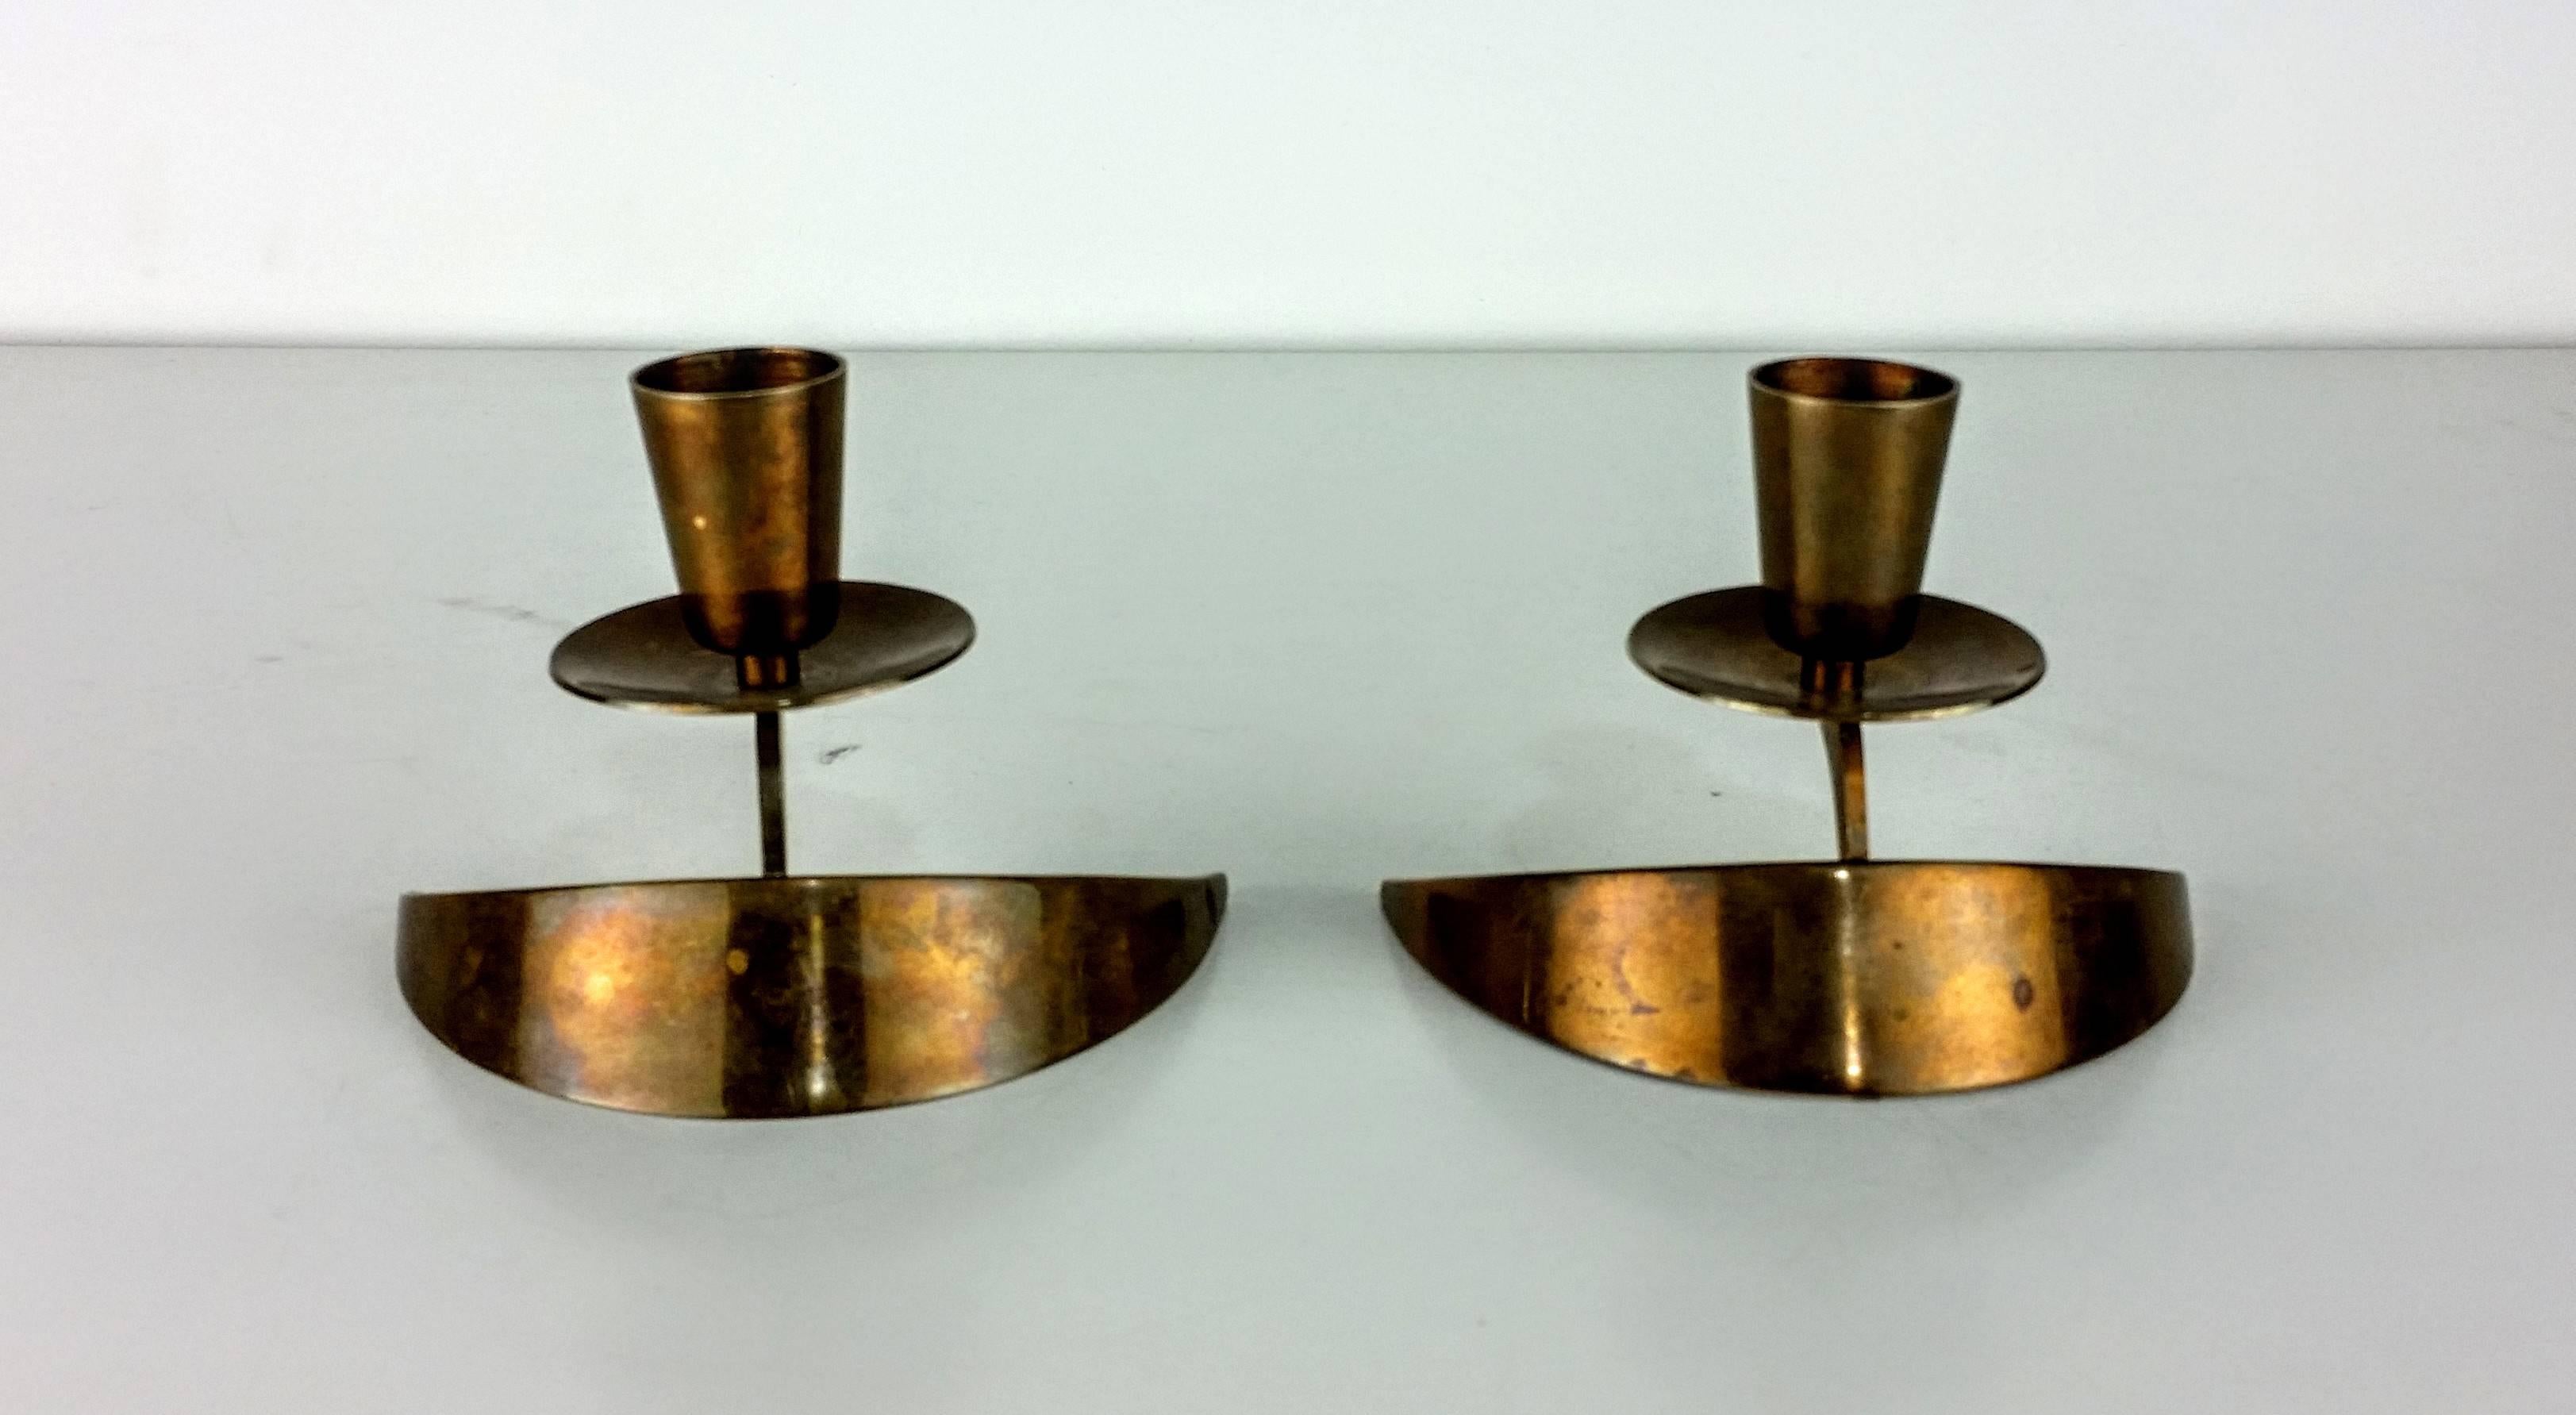 Rare pair of solid bronze candle holders by John Prip and Ronald Pearson. Excellent patina. Designed during the shop one period in the early 1950s. Stamped with 